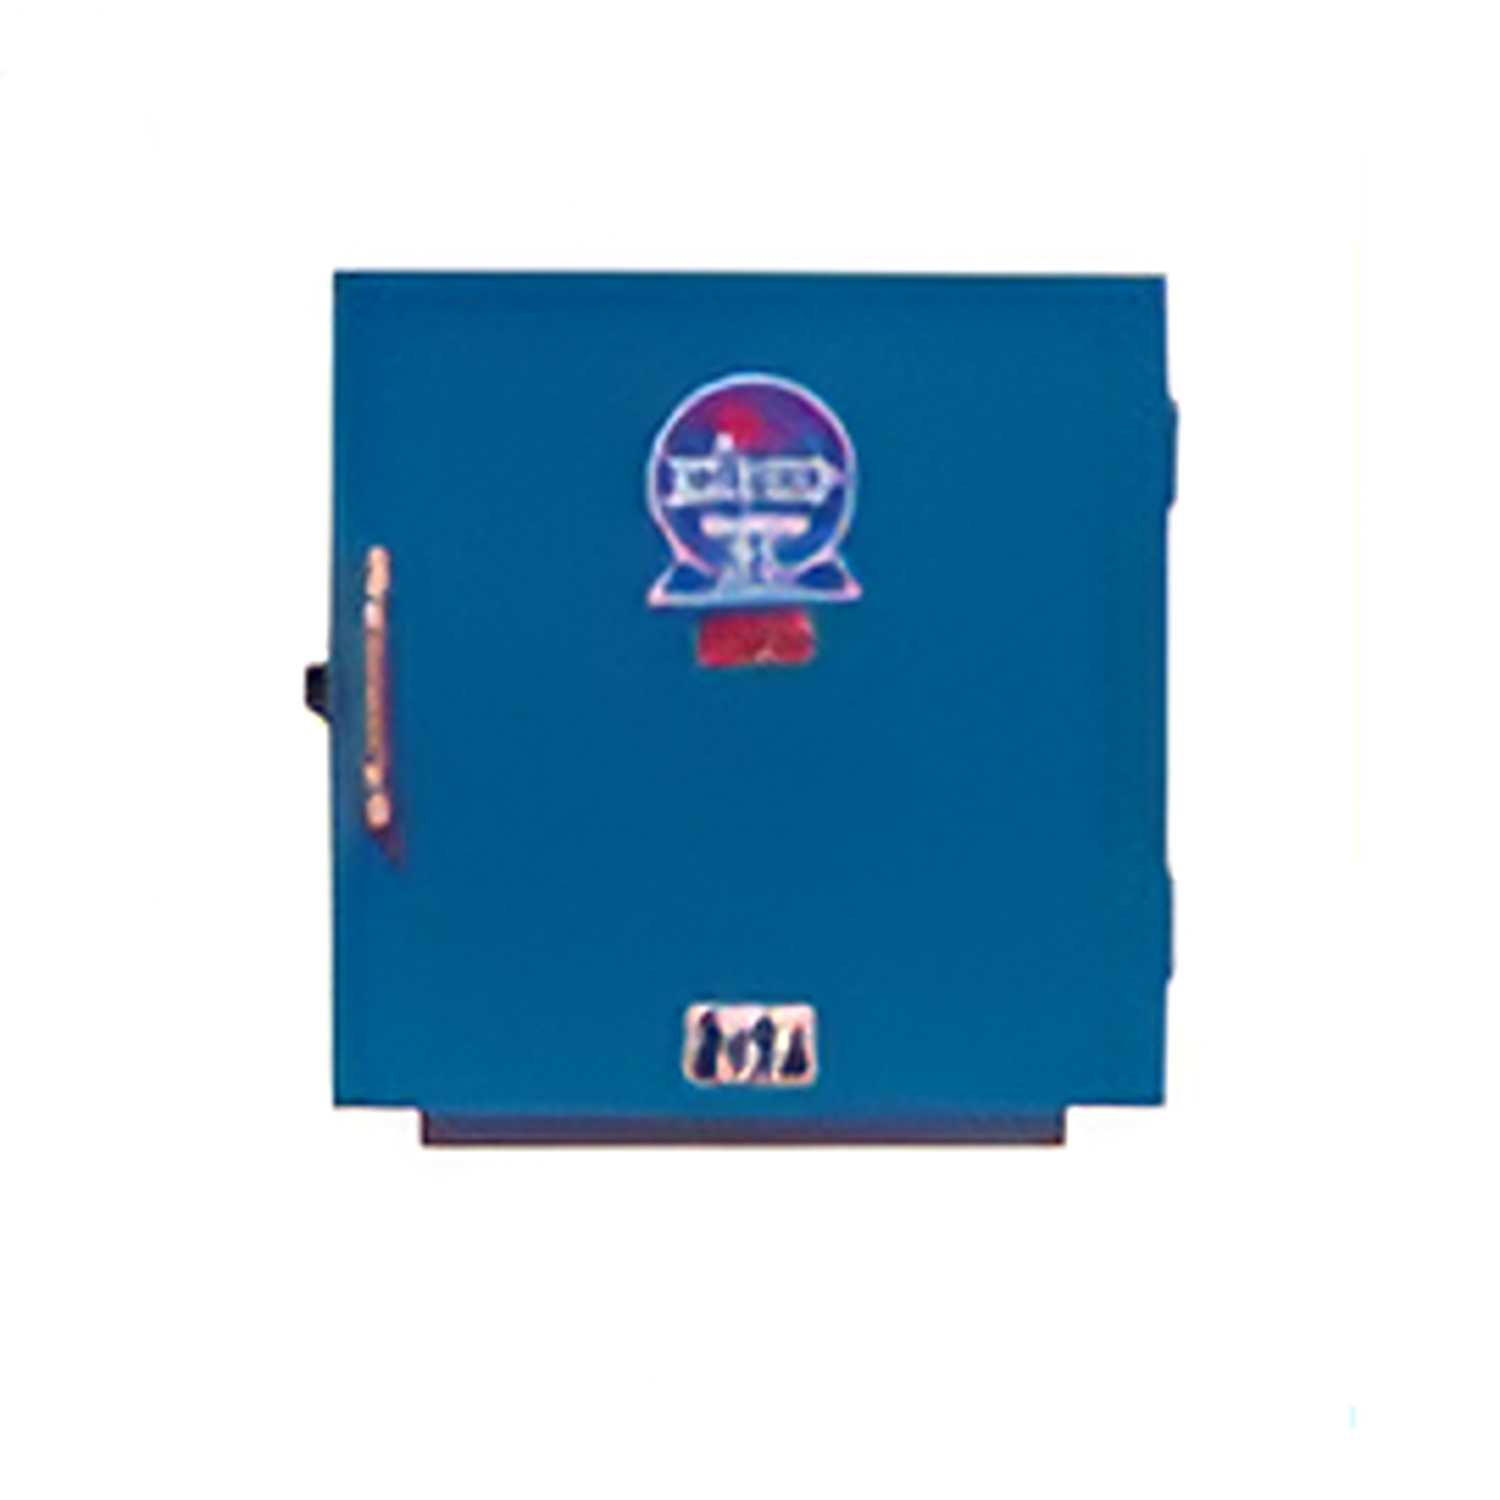 Electrode Oven K-200 - Premium Welding Products from YEW AIK - Shop now at Yew Aik.